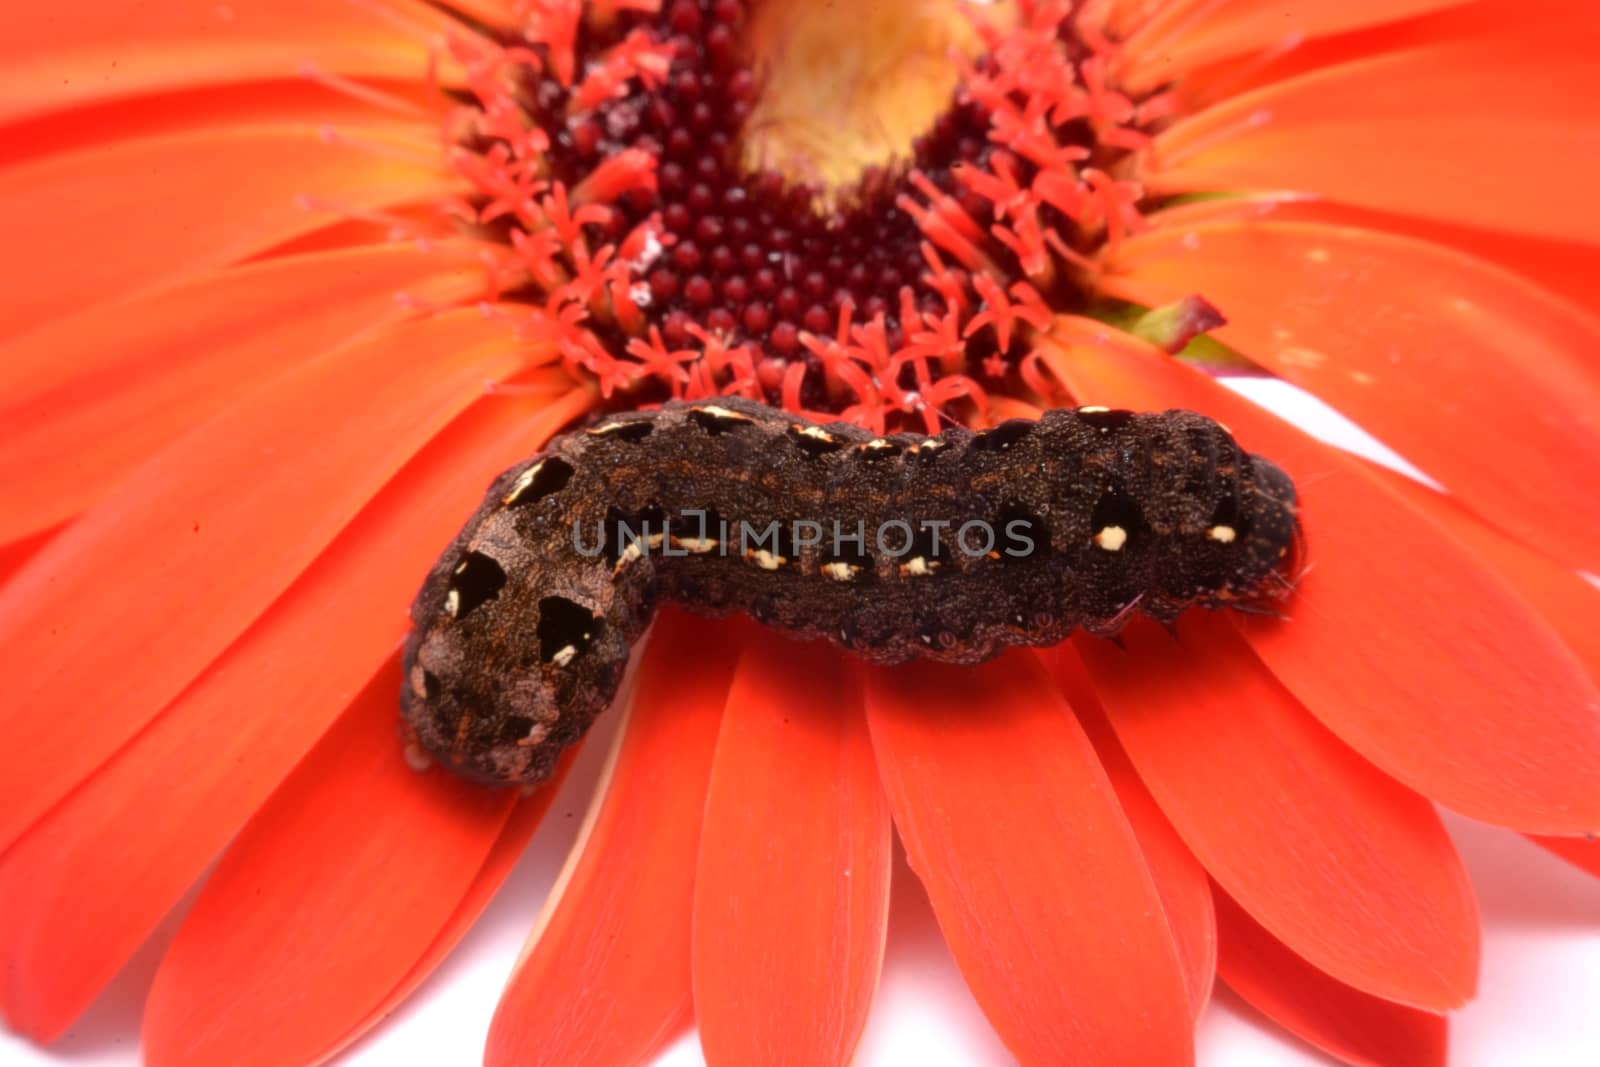 Butterfly black caterpillar over red flowers.